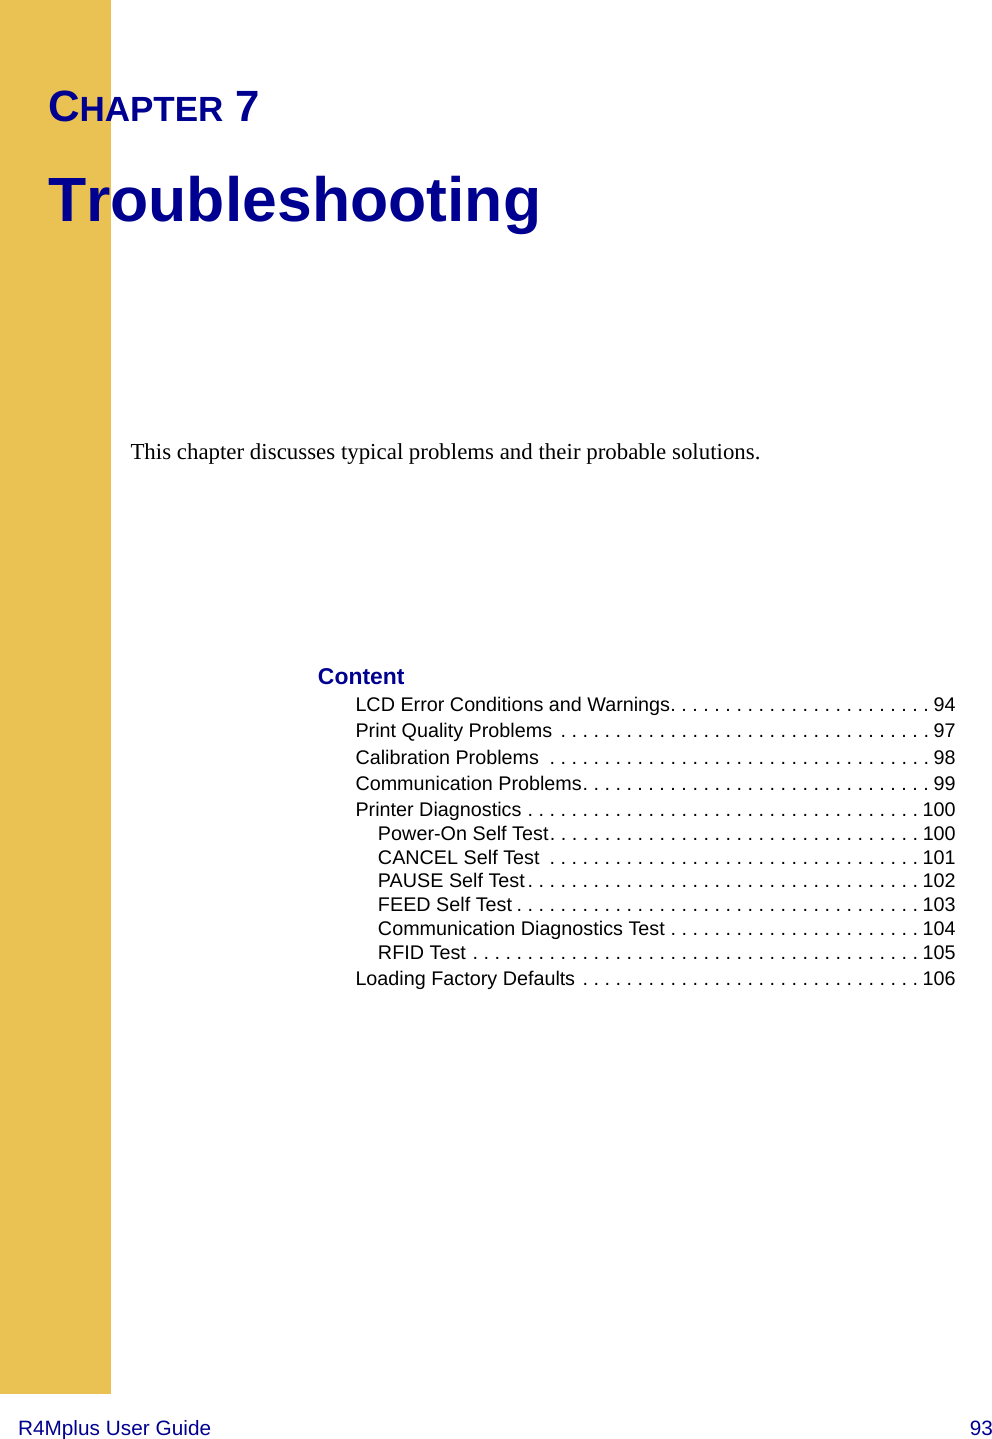 R4Mplus User Guide  93CHAPTER 7TroubleshootingThis chapter discusses typical problems and their probable solutions.ContentLCD Error Conditions and Warnings. . . . . . . . . . . . . . . . . . . . . . . . 94Print Quality Problems . . . . . . . . . . . . . . . . . . . . . . . . . . . . . . . . . . 97Calibration Problems  . . . . . . . . . . . . . . . . . . . . . . . . . . . . . . . . . . . 98Communication Problems. . . . . . . . . . . . . . . . . . . . . . . . . . . . . . . . 99Printer Diagnostics . . . . . . . . . . . . . . . . . . . . . . . . . . . . . . . . . . . . 100Power-On Self Test. . . . . . . . . . . . . . . . . . . . . . . . . . . . . . . . . . 100CANCEL Self Test  . . . . . . . . . . . . . . . . . . . . . . . . . . . . . . . . . . 101PAUSE Self Test . . . . . . . . . . . . . . . . . . . . . . . . . . . . . . . . . . . . 102FEED Self Test . . . . . . . . . . . . . . . . . . . . . . . . . . . . . . . . . . . . . 103Communication Diagnostics Test . . . . . . . . . . . . . . . . . . . . . . . 104RFID Test . . . . . . . . . . . . . . . . . . . . . . . . . . . . . . . . . . . . . . . . . 105Loading Factory Defaults . . . . . . . . . . . . . . . . . . . . . . . . . . . . . . . 106